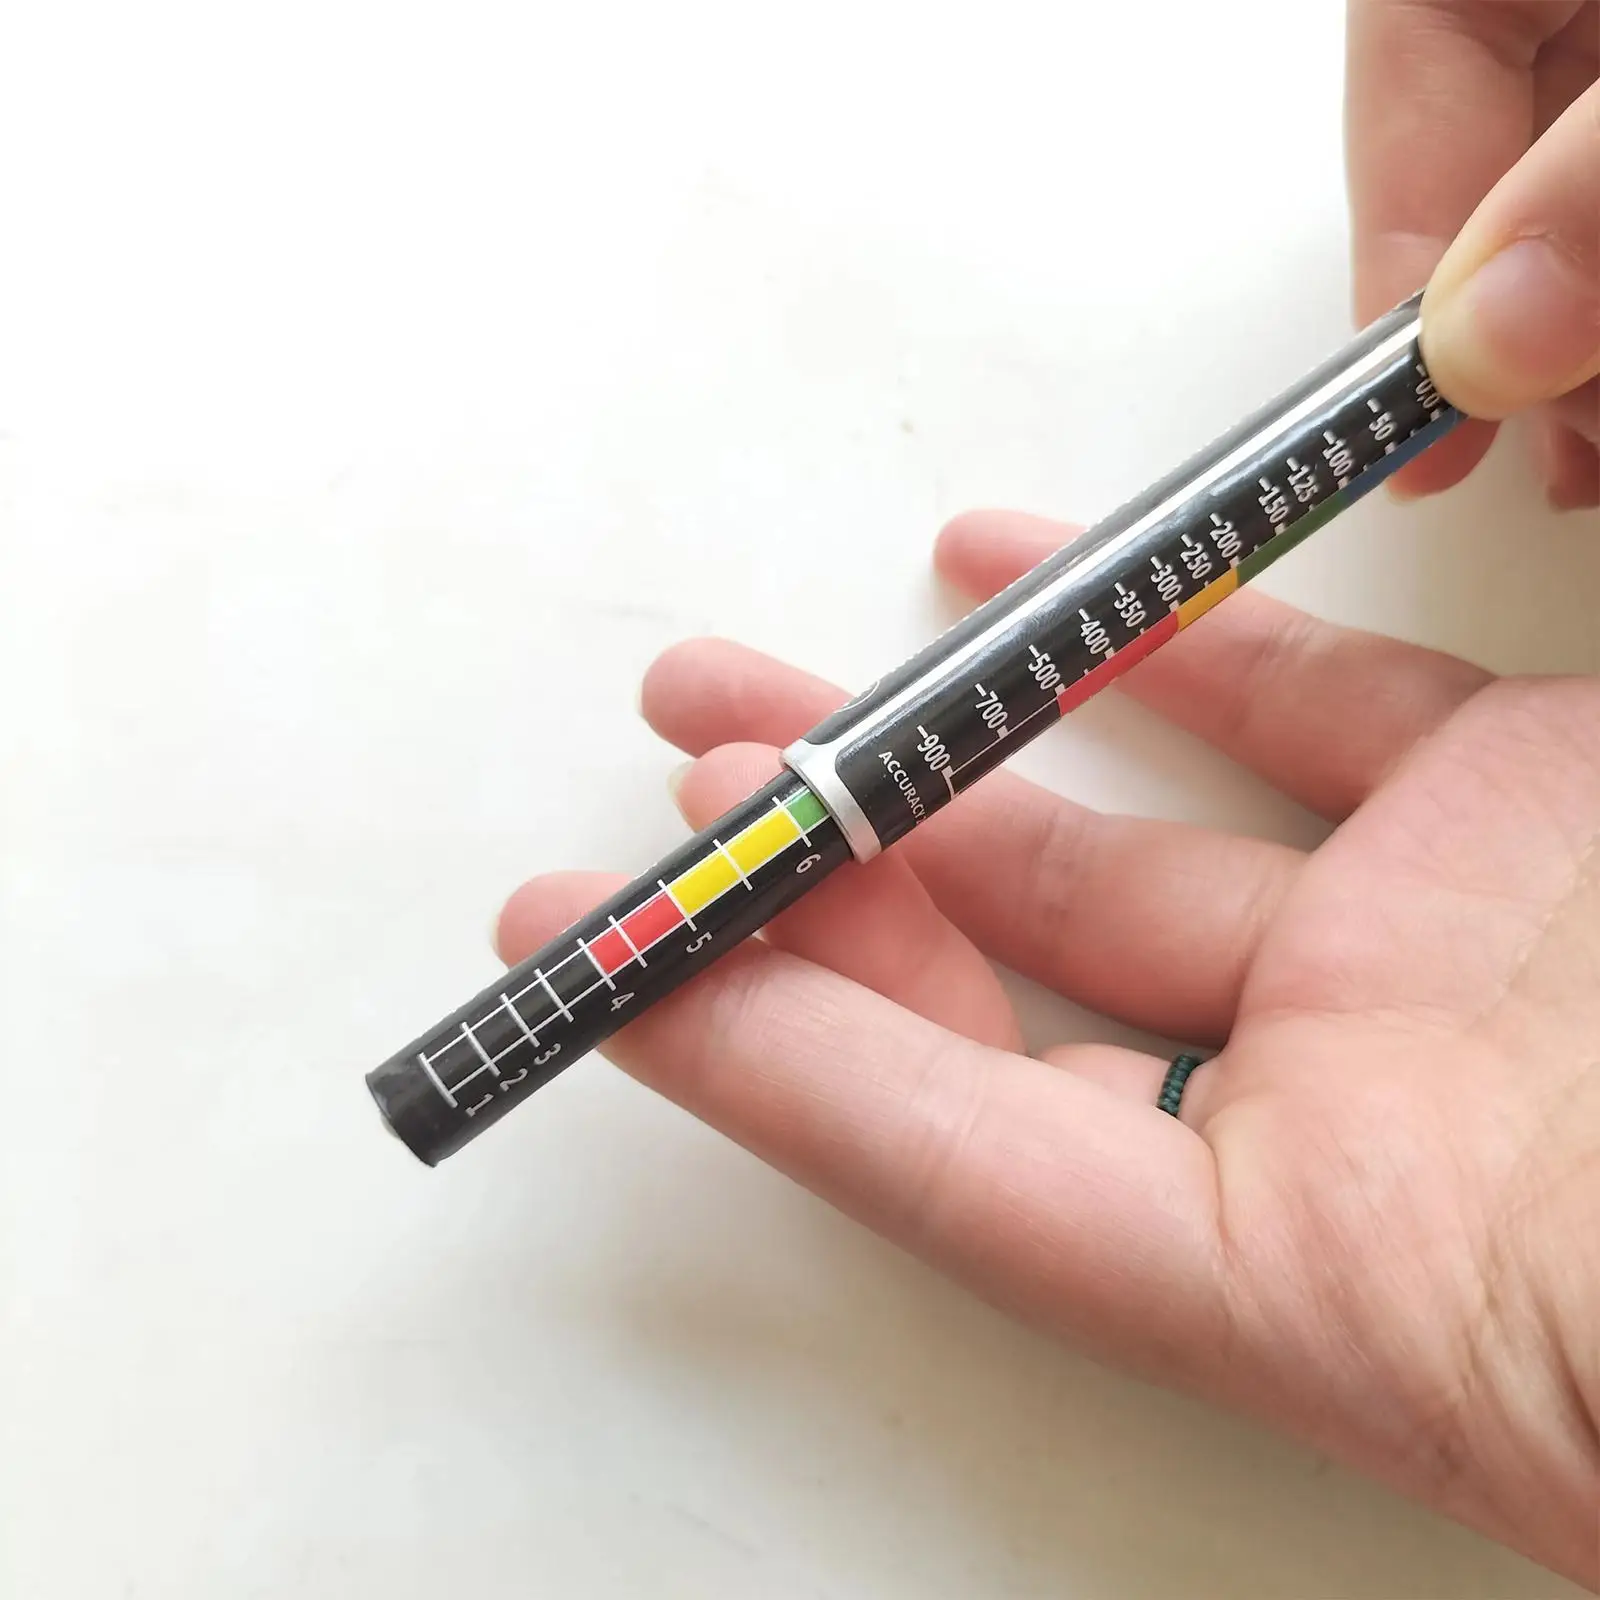 Pen Shaped Paint Thickness Gauge for Gauge Thickness of Car paint Body